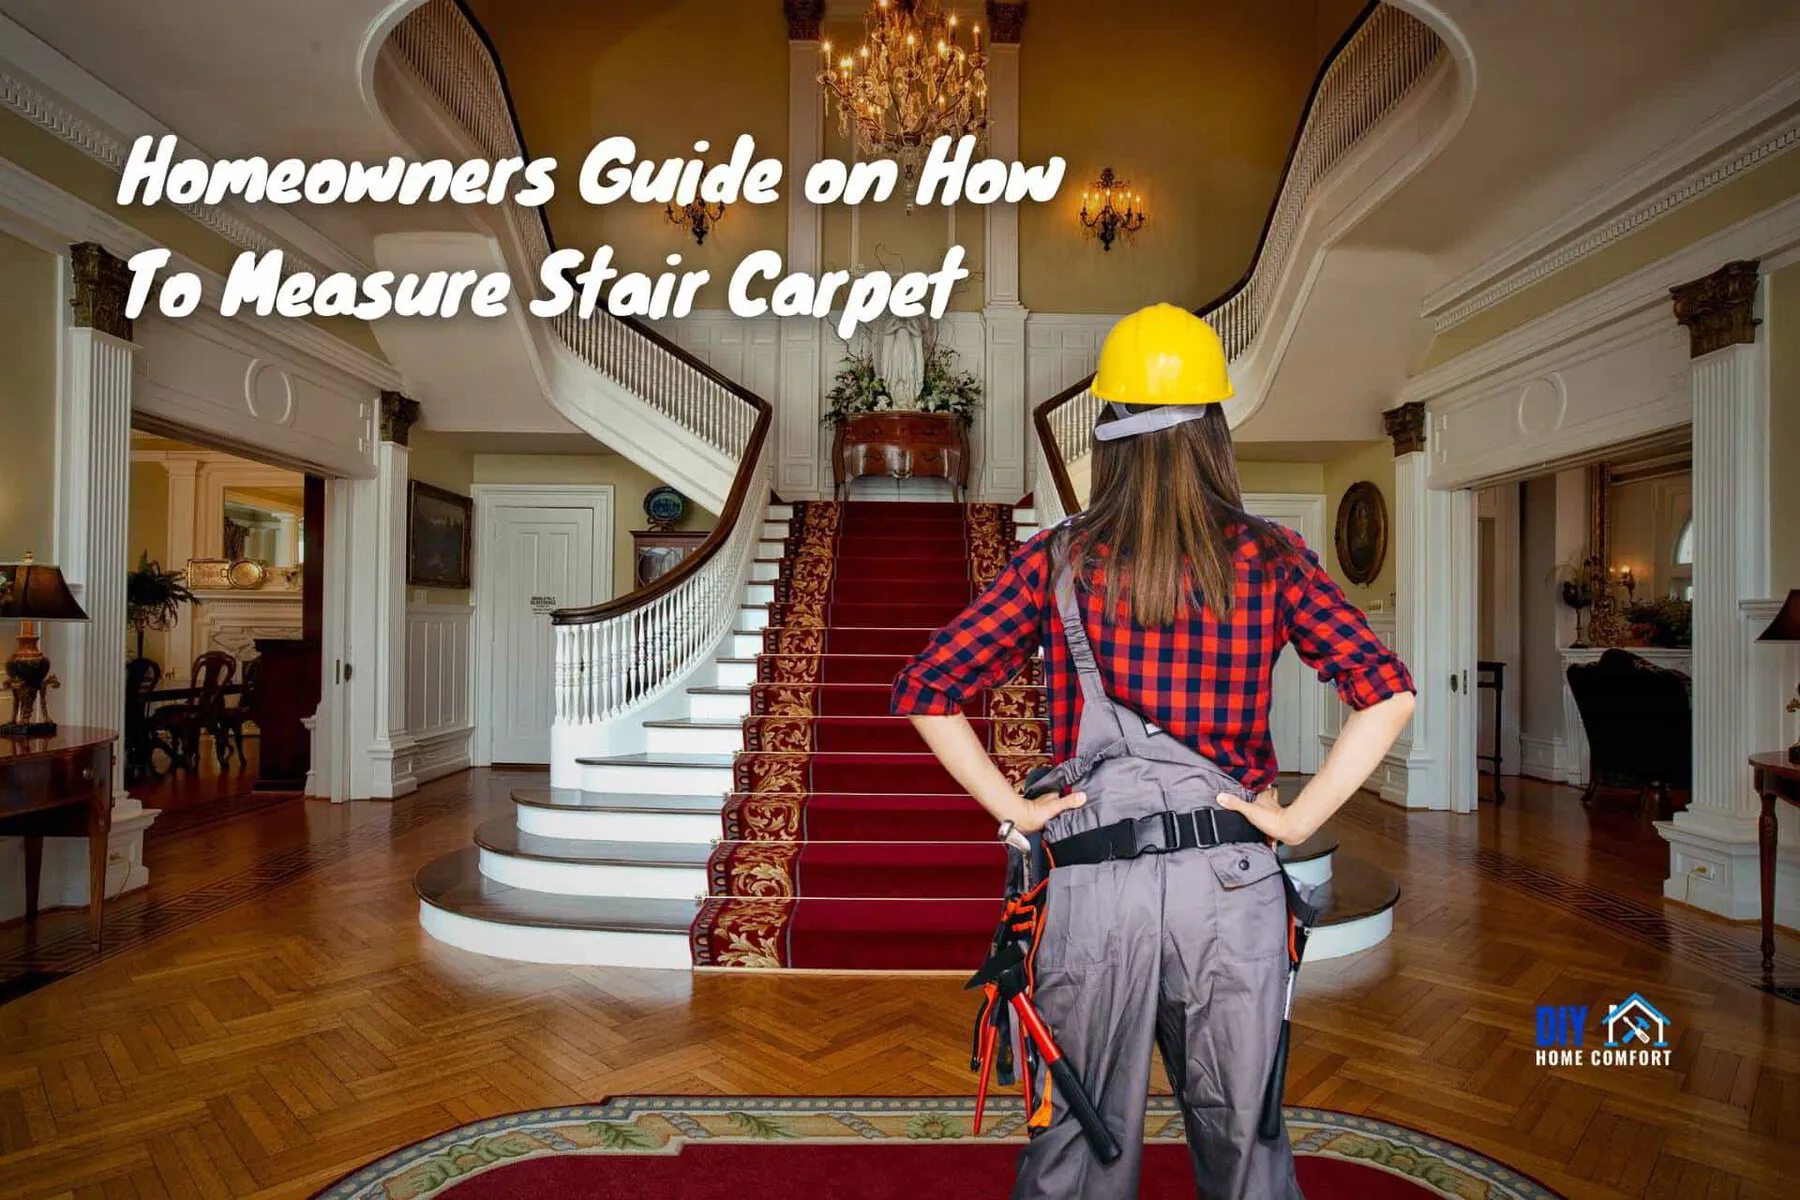 Homeowners Guide on How To Measure Stair Carpet | DIY Home Comfort